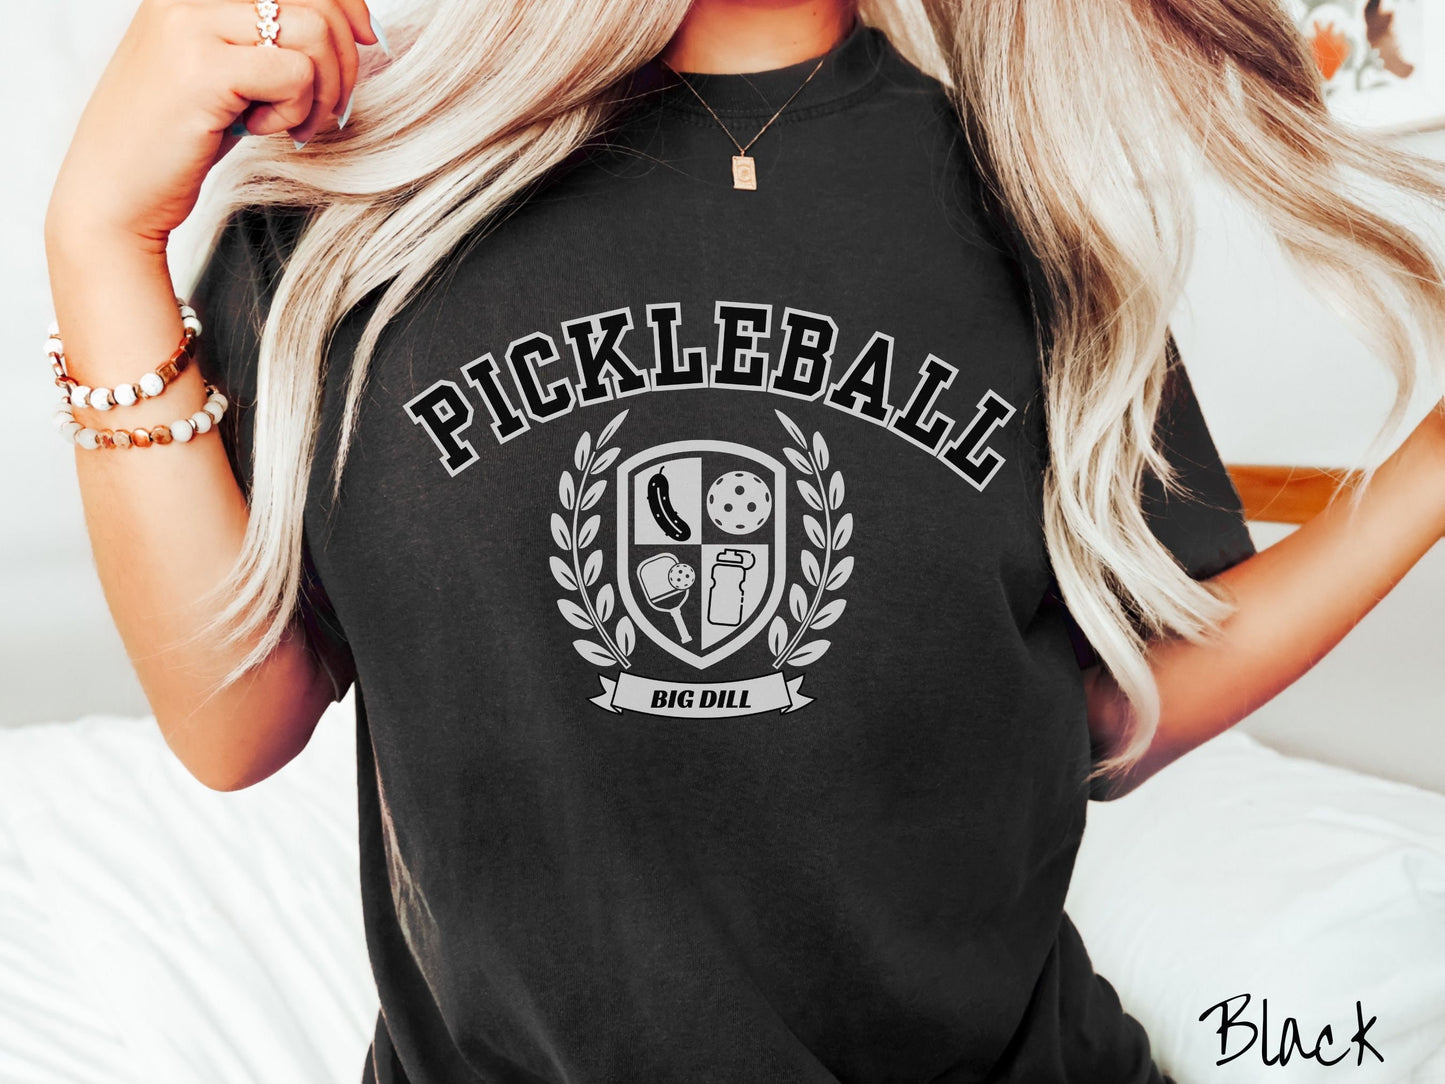 A woman wearing a cute black colored shirt with the text Pickleball across the top, a varsity logo centered underneath, and the words Big Dill underneath the logo.